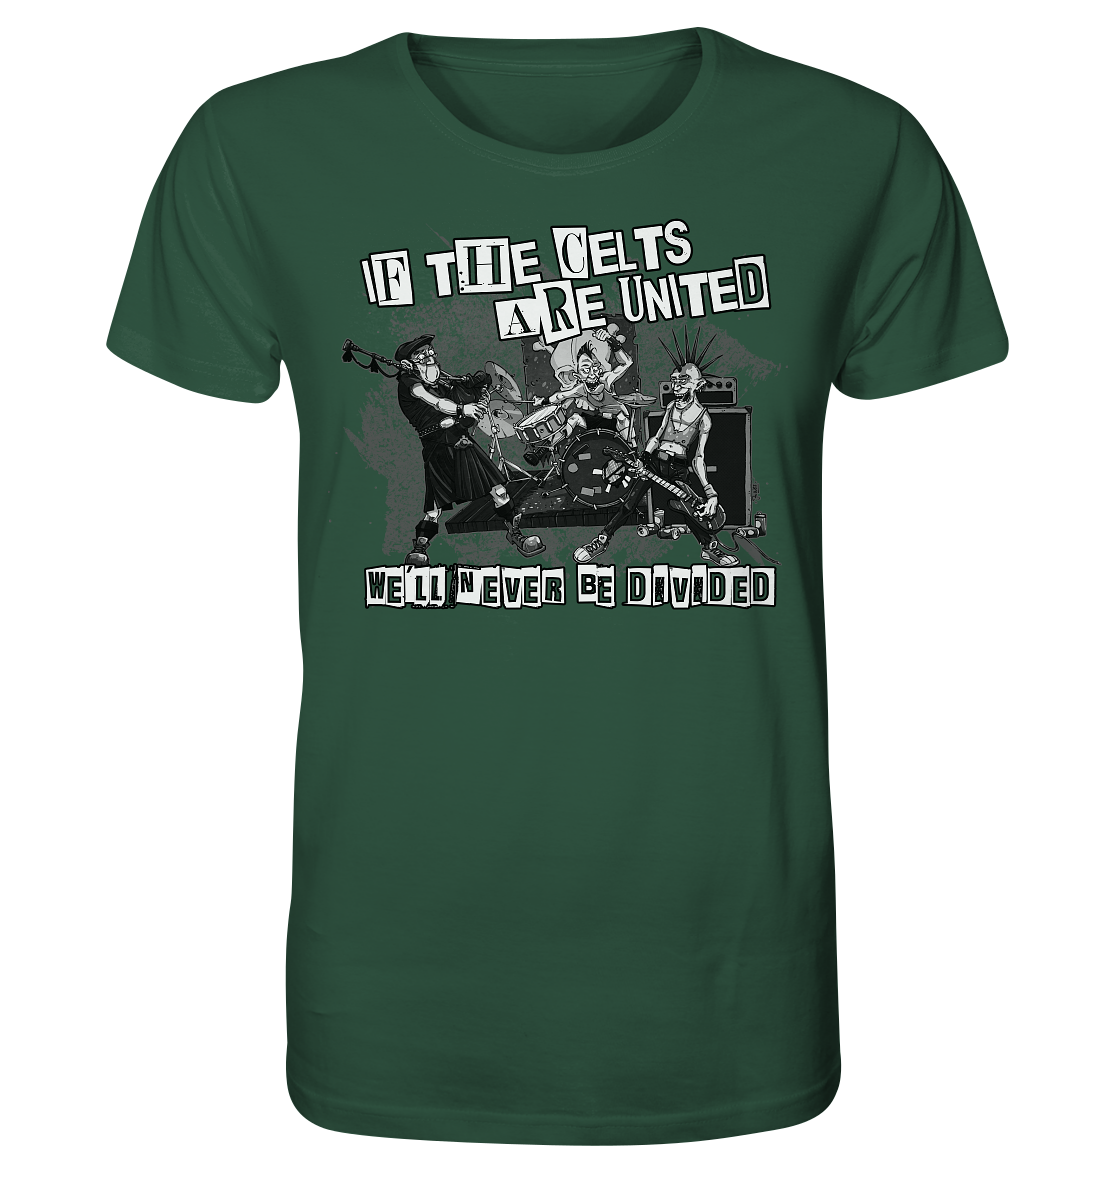 If The Celts Are United "We'll Never Be Divided" - Organic Shirt